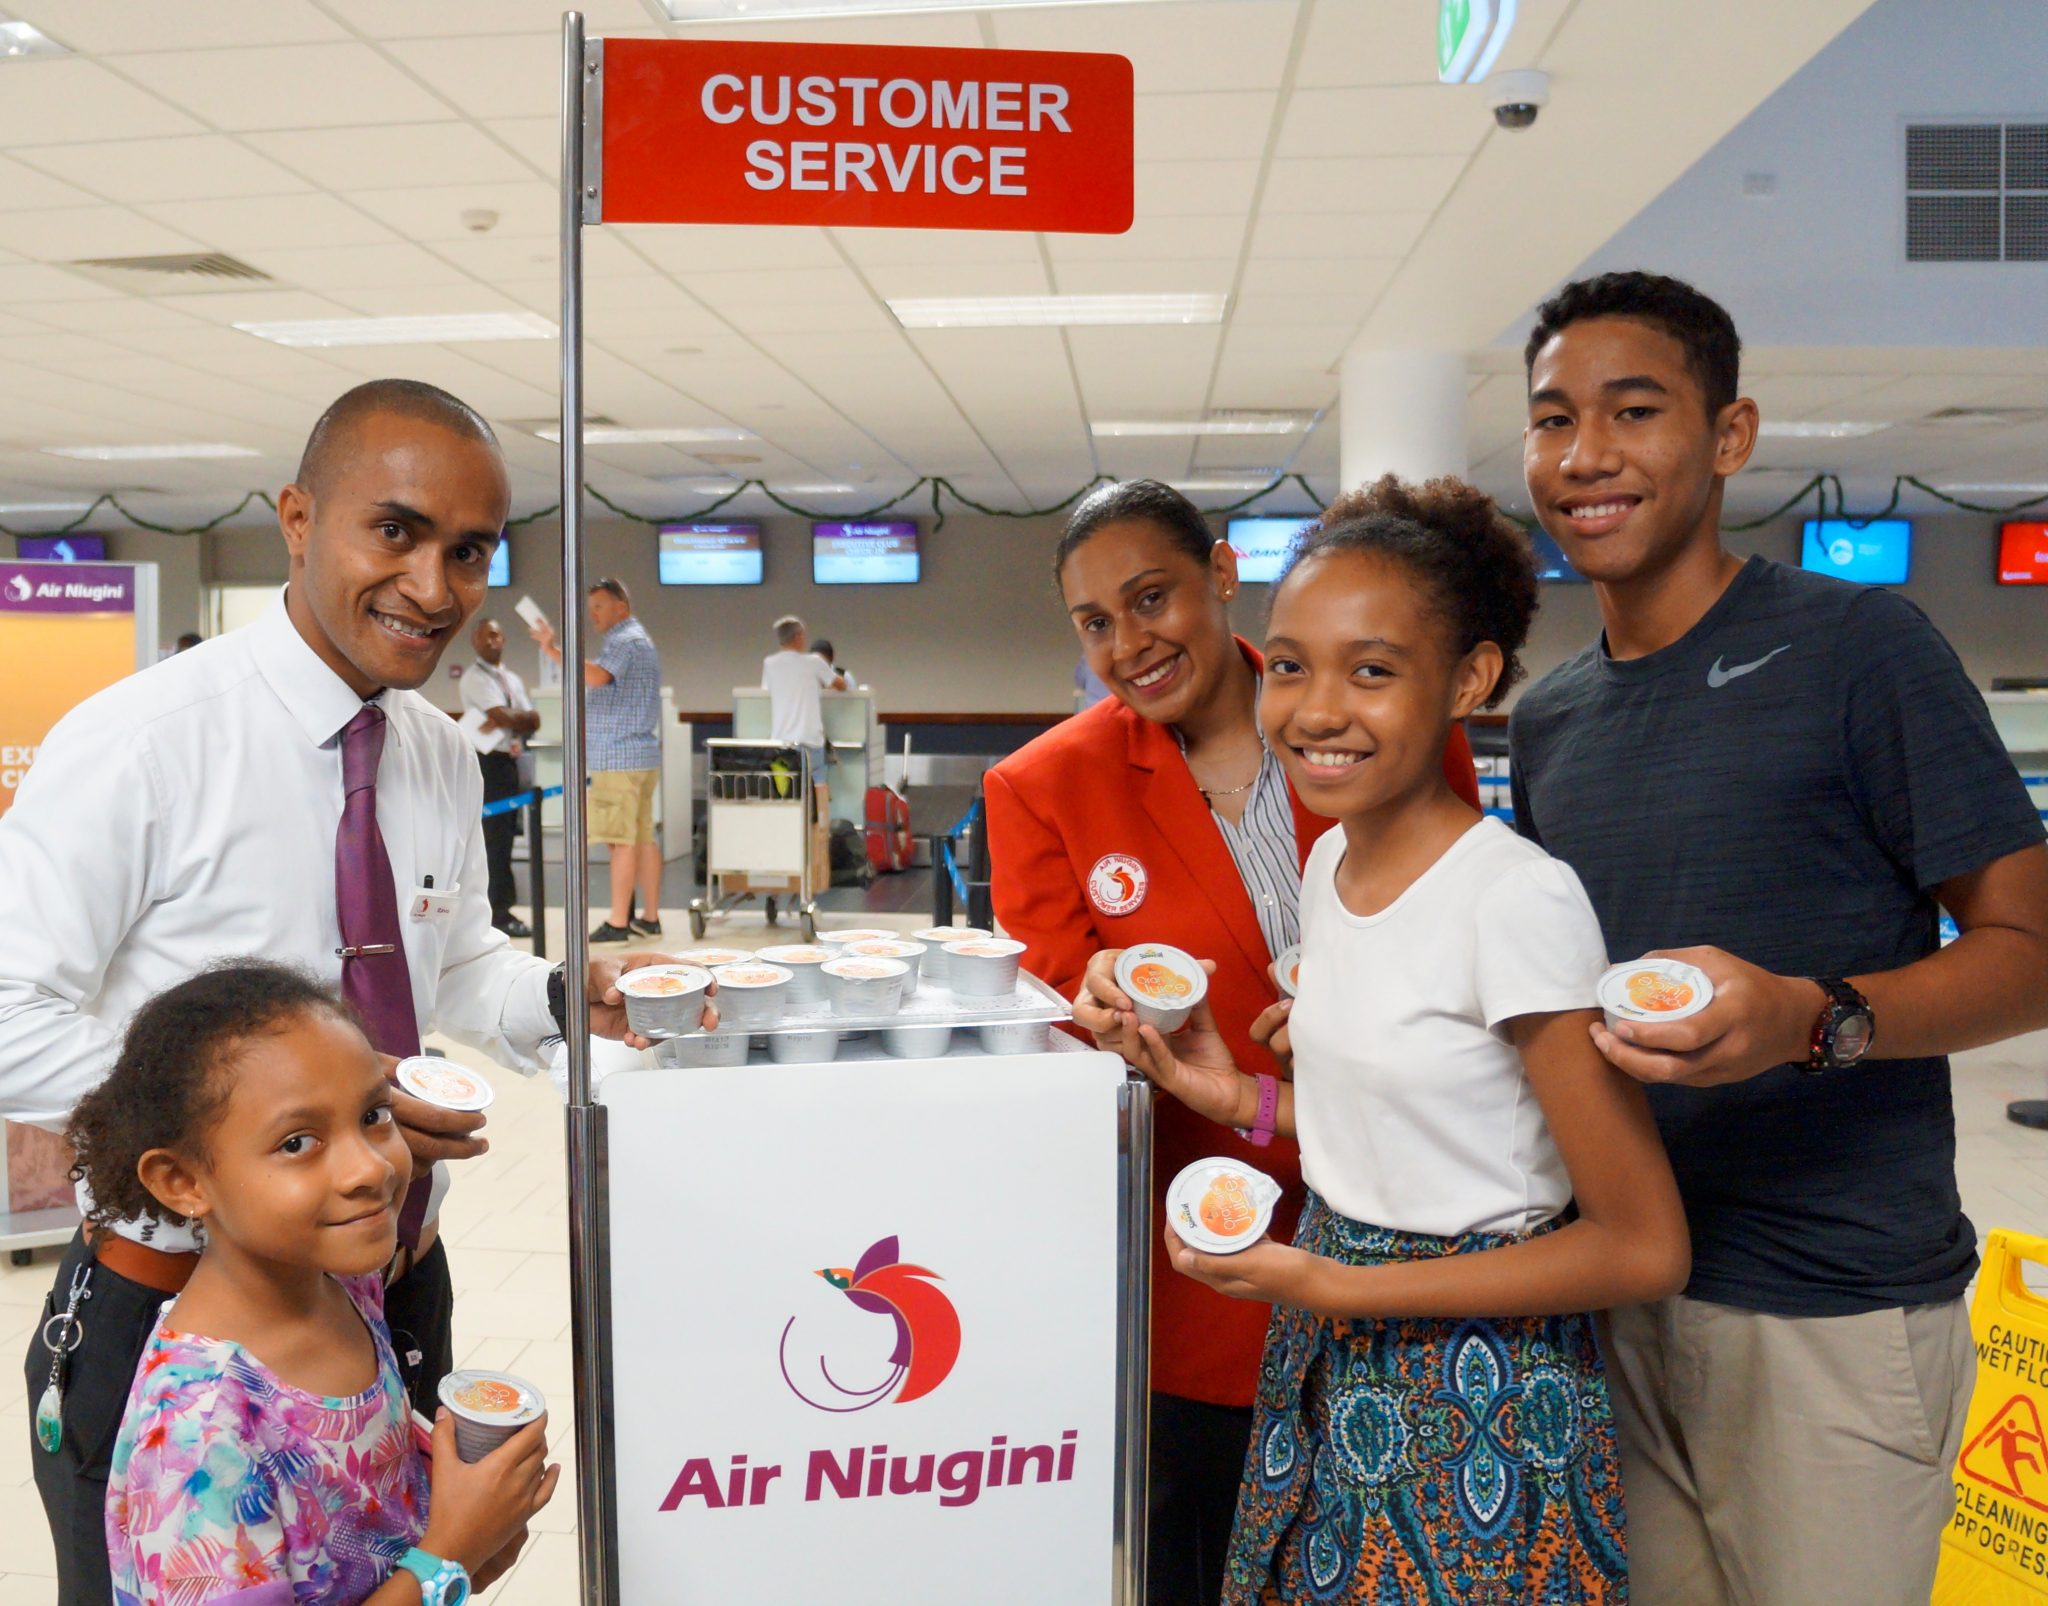 Air Niugini offers free water and juice in the festive period